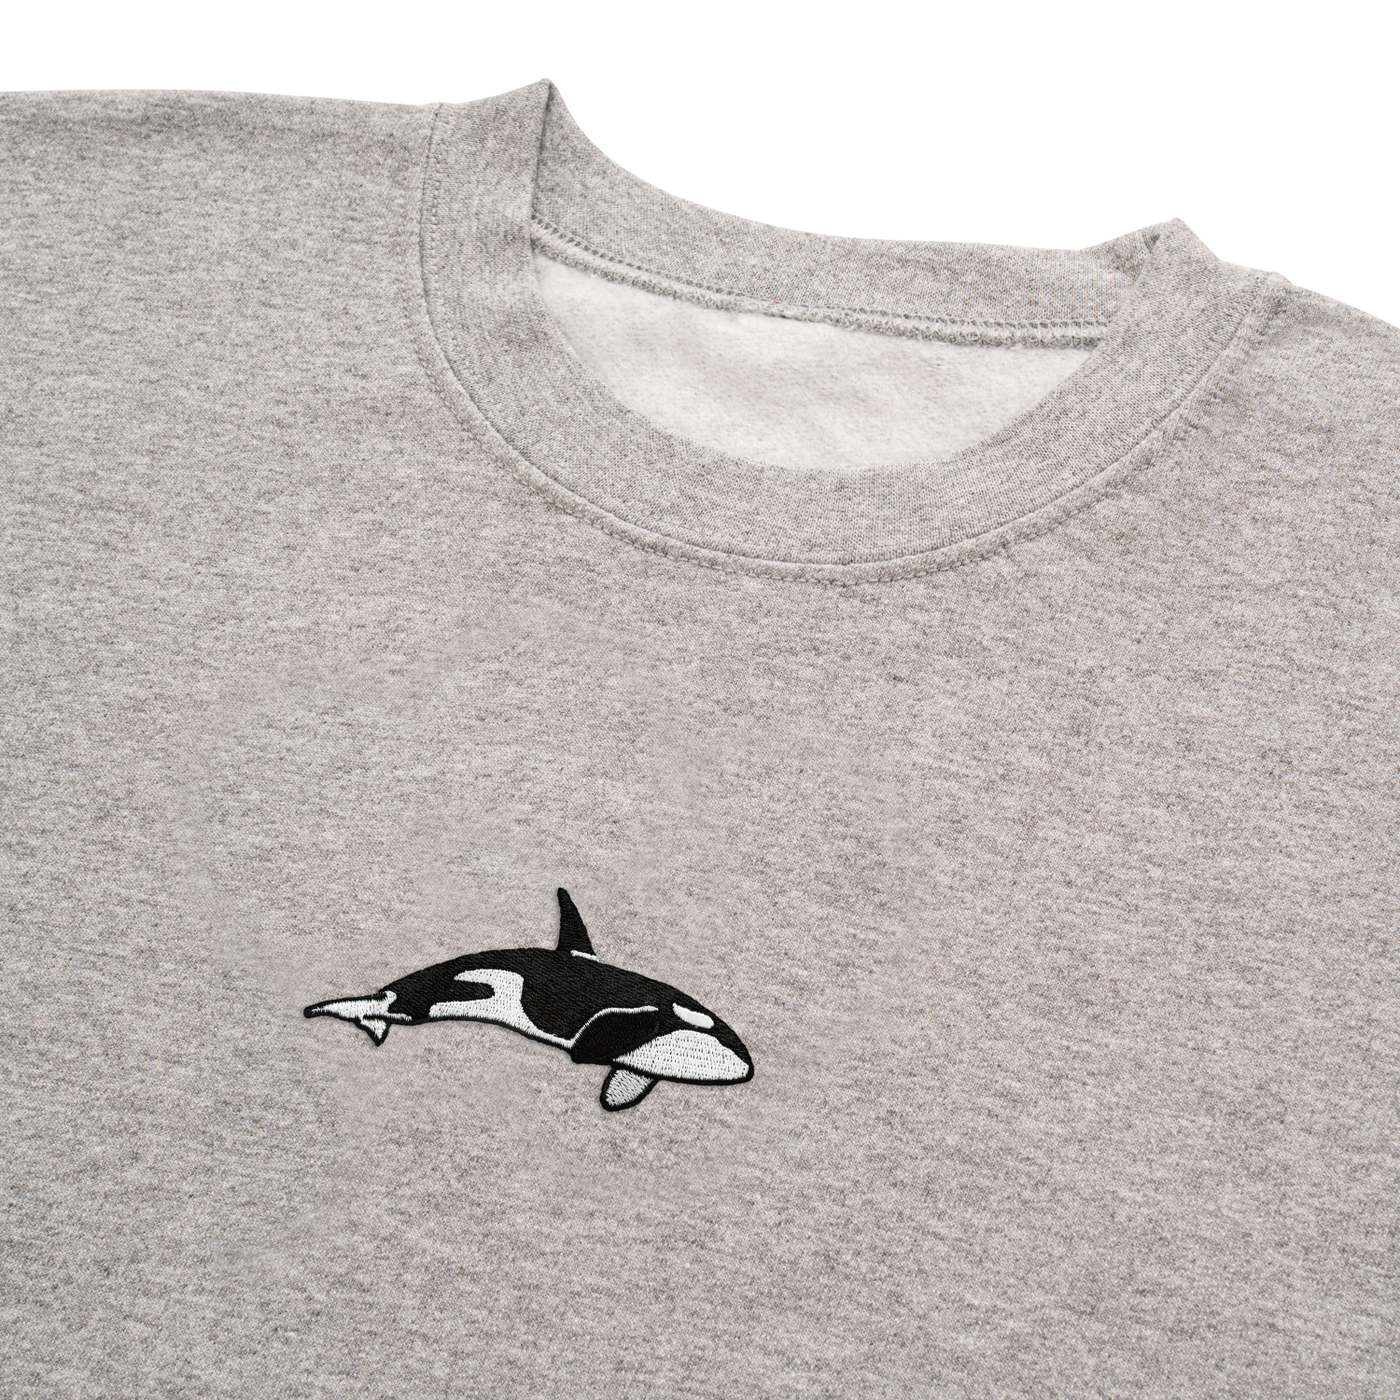 Bobby's Planet Women's Embroidered Orca Sweatshirt from Seven Seas Fish Animals Collection in Sport Grey Color#color_sport-grey